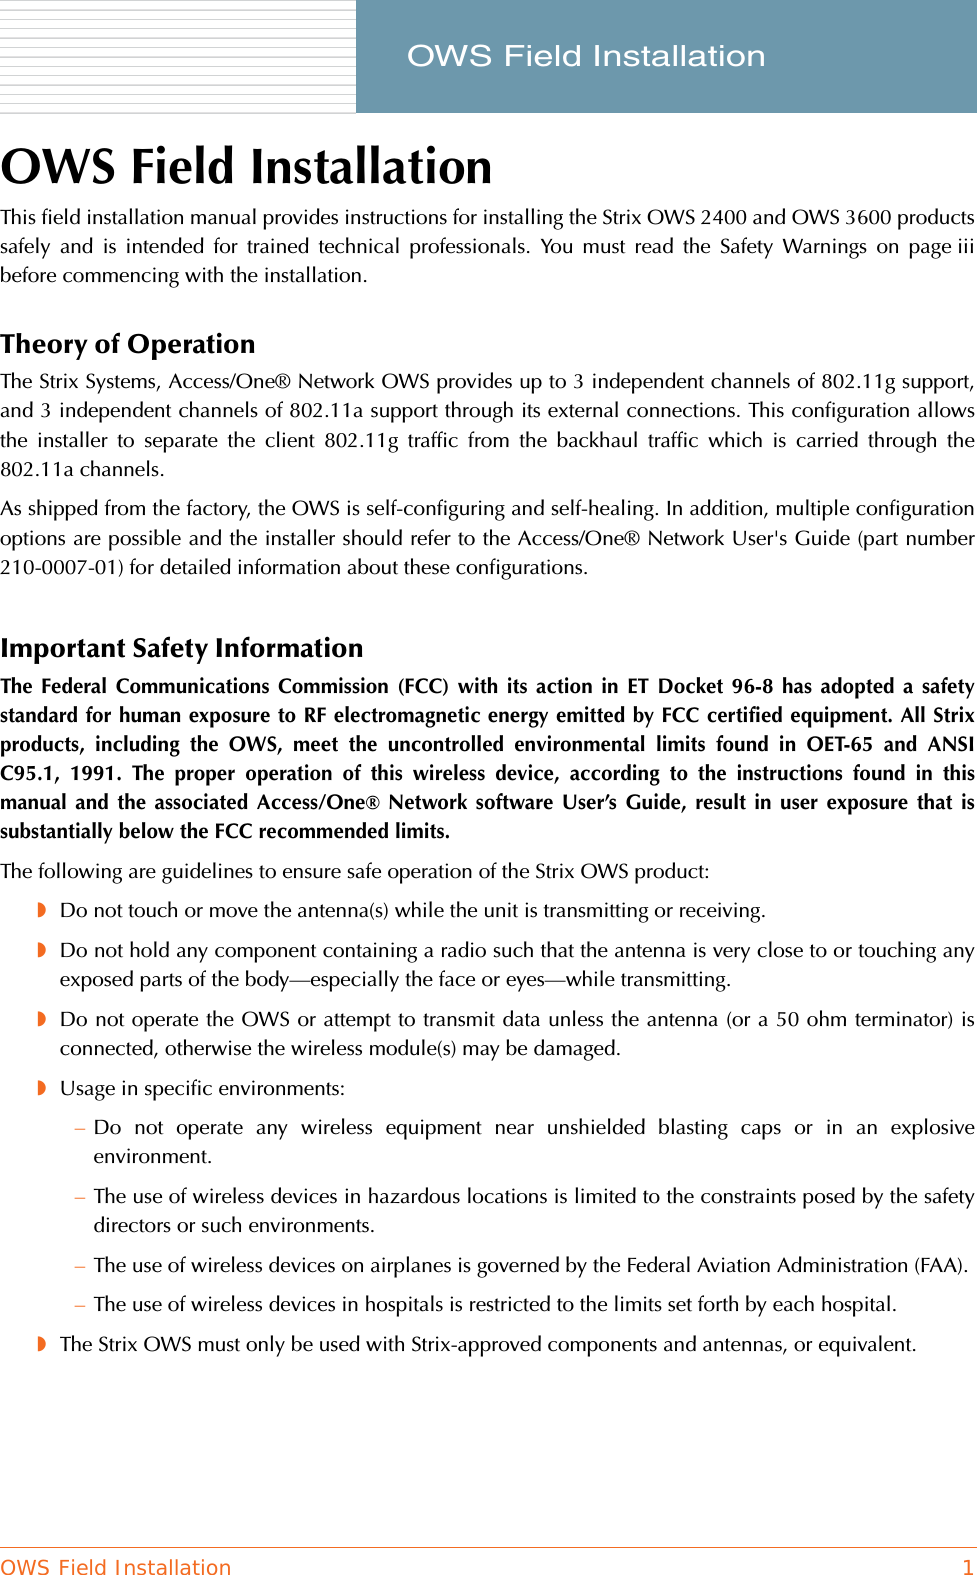 OWS Field Installation 1     OWS Field InstallationOWS Field InstallationThis field installation manual provides instructions for installing the Strix OWS 2400 and OWS 3600 productssafely and is intended for trained technical professionals. You must read the Safety Warnings on page iiibefore commencing with the installation.Theory of OperationThe Strix Systems, Access/One® Network OWS provides up to 3 independent channels of 802.11g support,and 3 independent channels of 802.11a support through its external connections. This configuration allowsthe installer to separate the client 802.11g traffic from the backhaul traffic which is carried through the802.11a channels.As shipped from the factory, the OWS is self-configuring and self-healing. In addition, multiple configurationoptions are possible and the installer should refer to the Access/One® Network User&apos;s Guide (part number210-0007-01) for detailed information about these configurations.Important Safety InformationThe Federal Communications Commission (FCC) with its action in ET Docket 96-8 has adopted a safetystandard for human exposure to RF electromagnetic energy emitted by FCC certified equipment. All Strixproducts, including the OWS, meet the uncontrolled environmental limits found in OET-65 and ANSIC95.1, 1991. The proper operation of this wireless device, according to the instructions found in thismanual and the associated Access/One® Network software User’s Guide, result in user exposure that issubstantially below the FCC recommended limits.The following are guidelines to ensure safe operation of the Strix OWS product:◗Do not touch or move the antenna(s) while the unit is transmitting or receiving.◗Do not hold any component containing a radio such that the antenna is very close to or touching anyexposed parts of the body—especially the face or eyes—while transmitting.◗Do not operate the OWS or attempt to transmit data unless the antenna (or a 50 ohm terminator) isconnected, otherwise the wireless module(s) may be damaged.◗Usage in specific environments:–Do not operate any wireless equipment near unshielded blasting caps or in an explosiveenvironment.–The use of wireless devices in hazardous locations is limited to the constraints posed by the safetydirectors or such environments.–The use of wireless devices on airplanes is governed by the Federal Aviation Administration (FAA).–The use of wireless devices in hospitals is restricted to the limits set forth by each hospital.◗The Strix OWS must only be used with Strix-approved components and antennas, or equivalent.